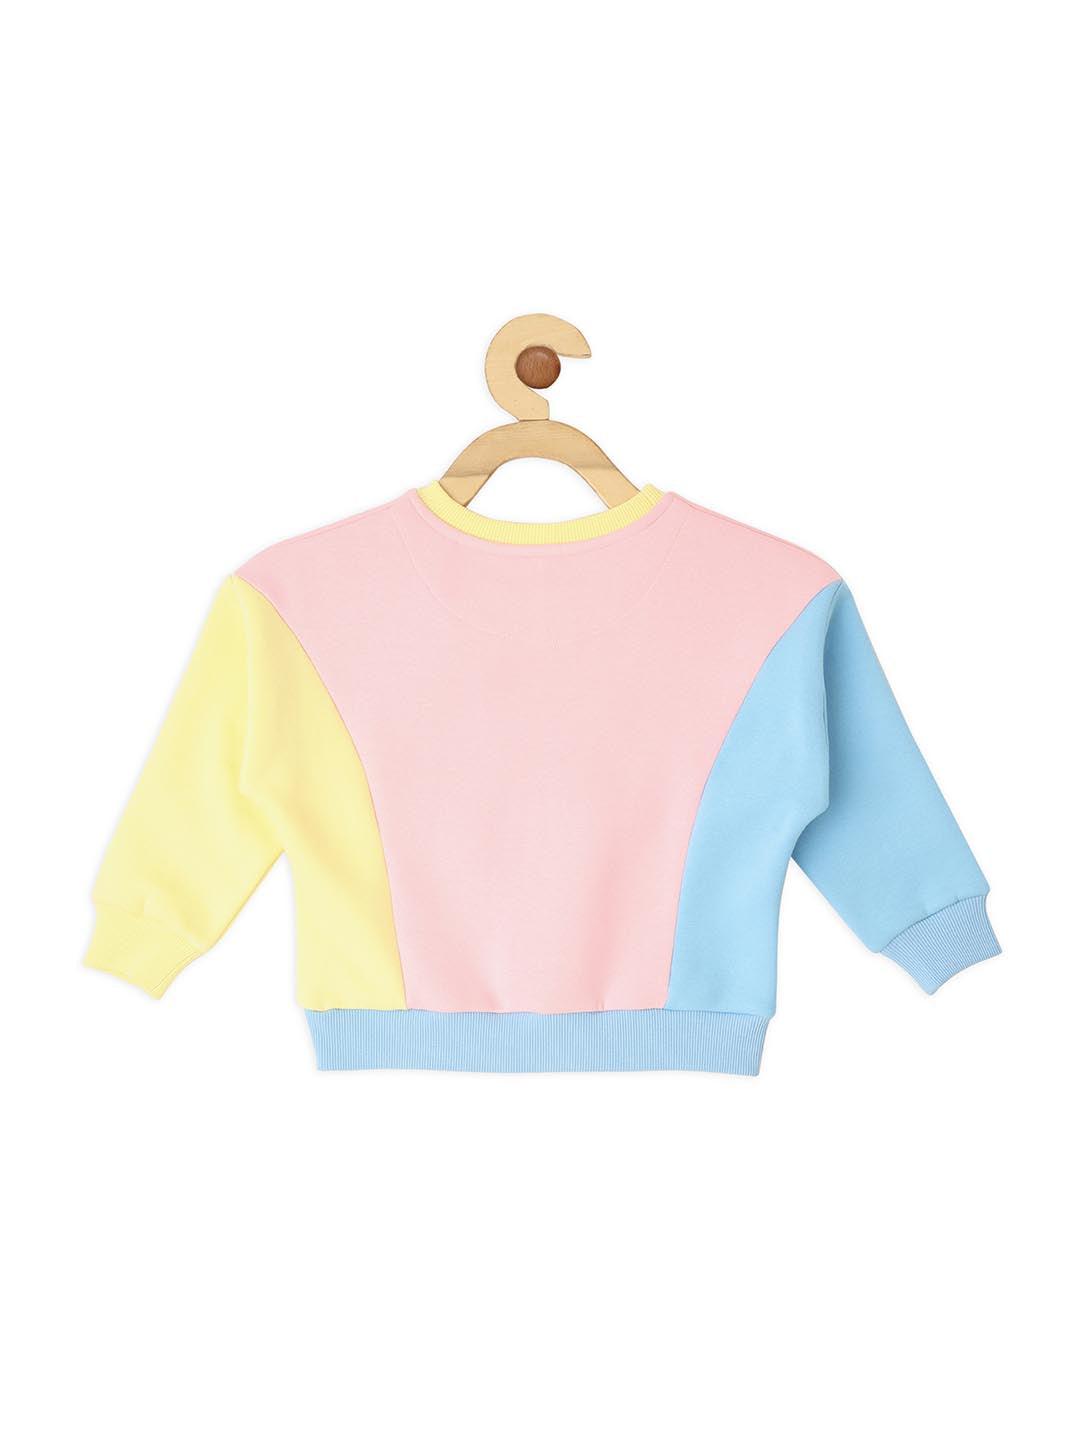 Orchid Tri-Colour Sweat Shirt for Girls - Lagorii Kids